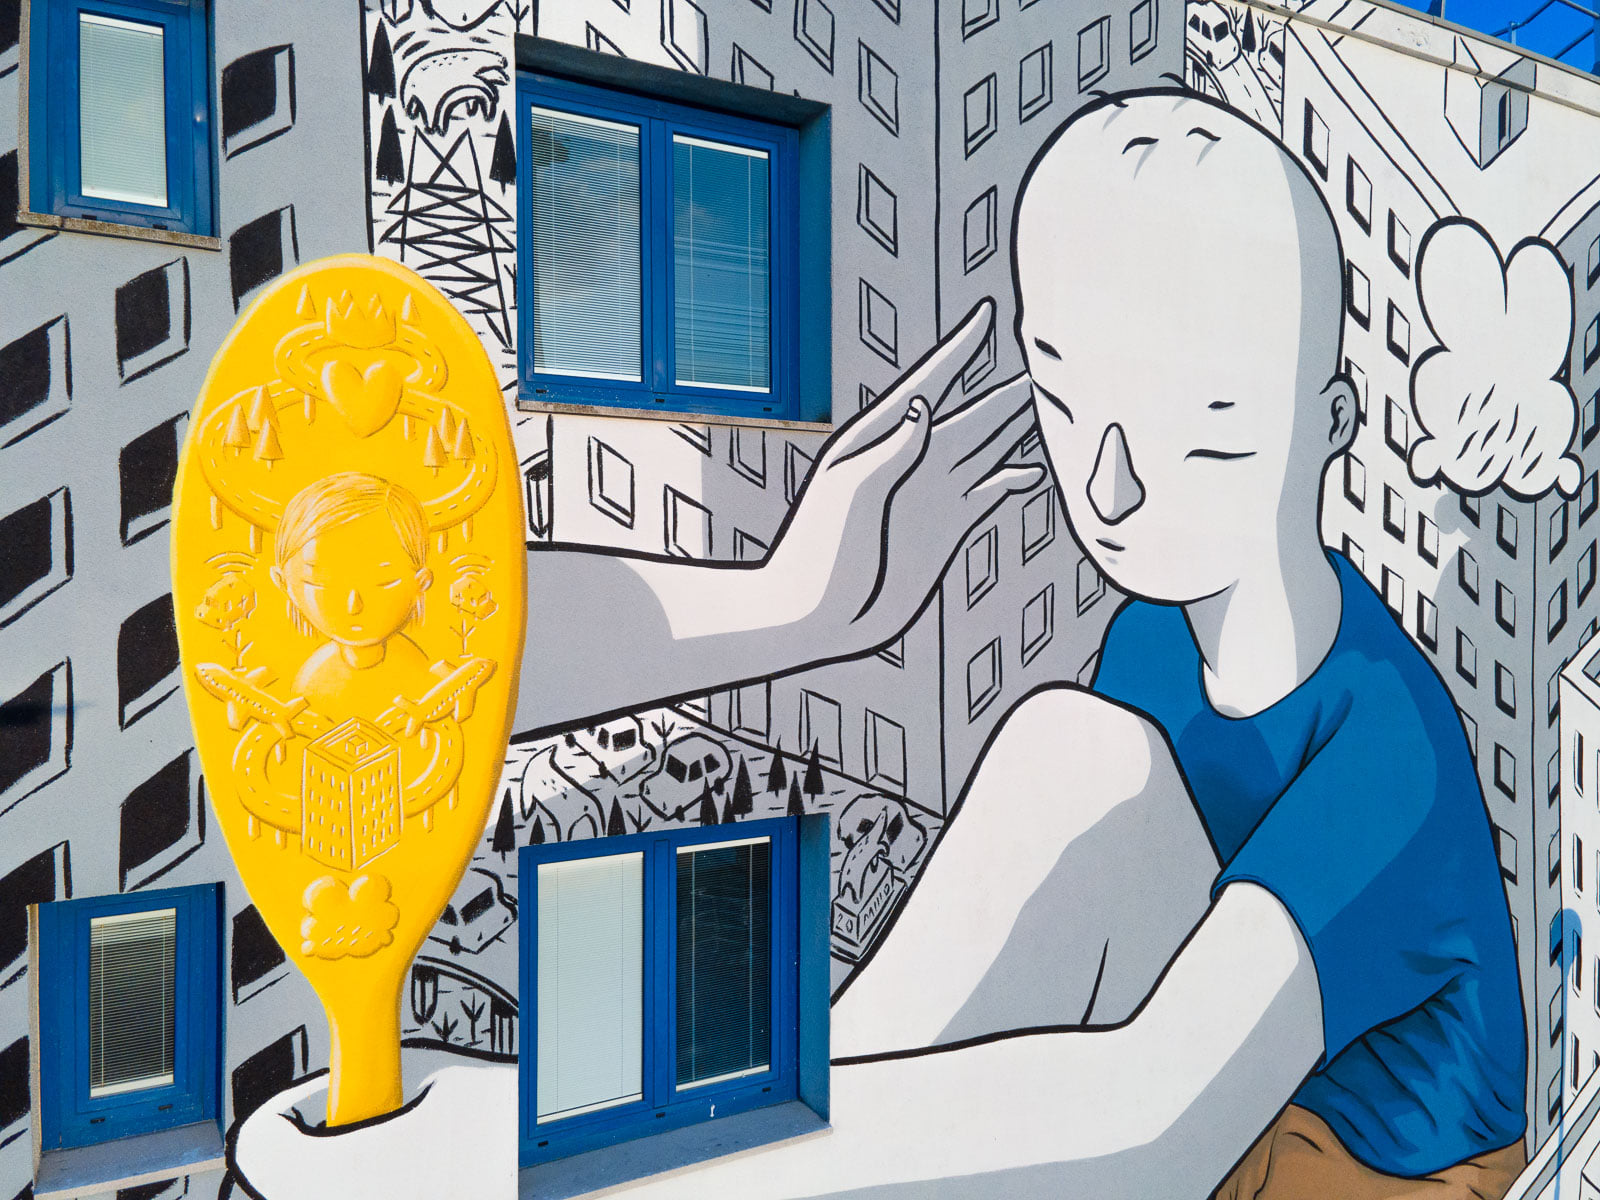 Mirror by Millo